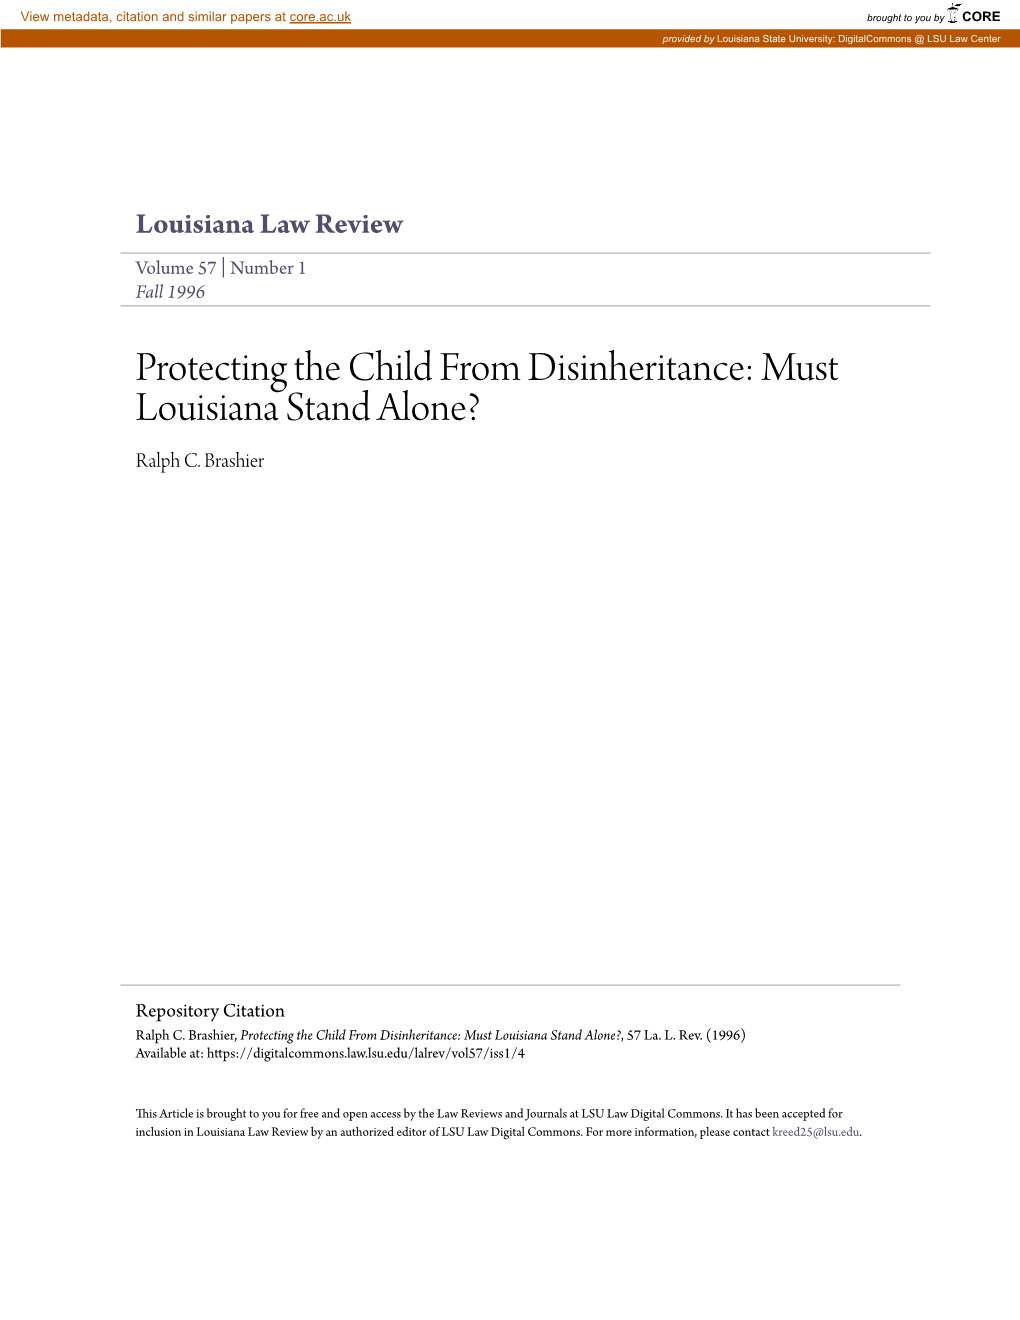 Protecting the Child from Disinheritance: Must Louisiana Stand Alone? Ralph C